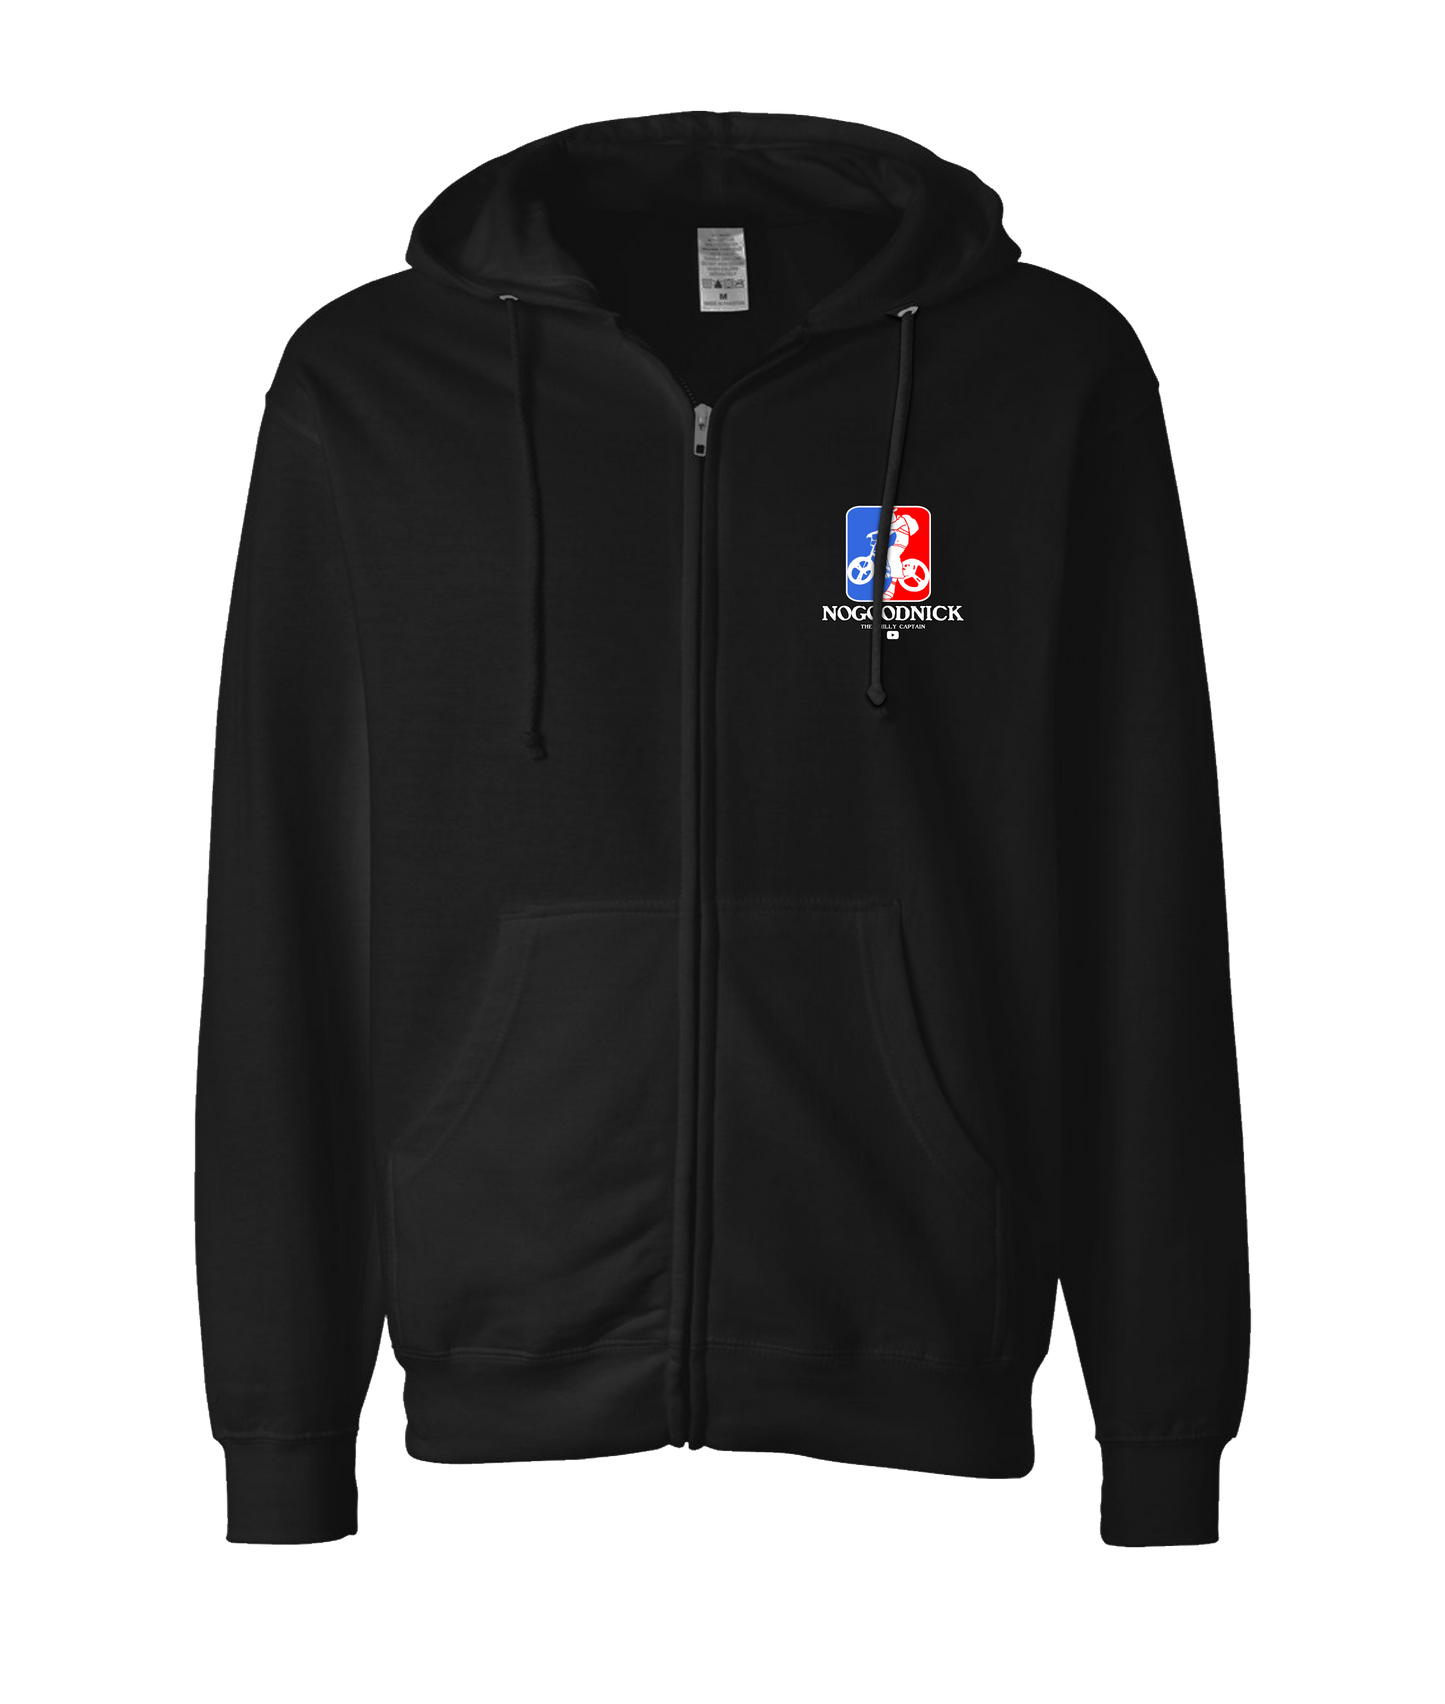 The Philly Captain's Merch is Fire - No Good Nick - Black Zip Up Hoodie